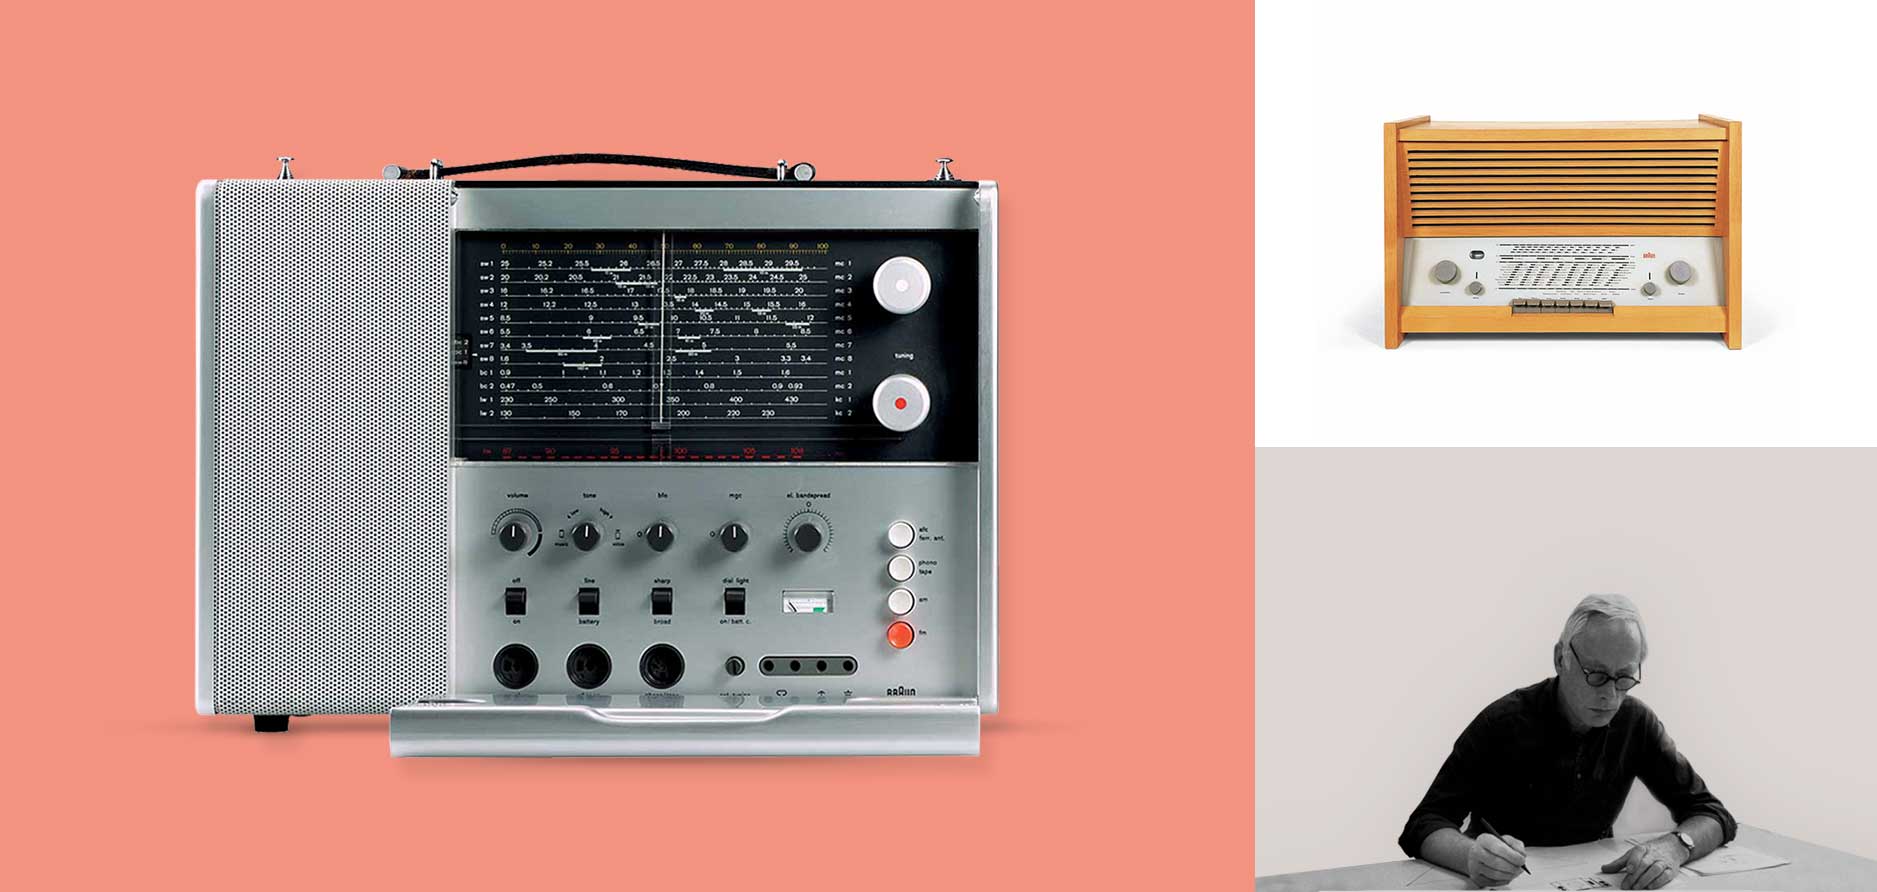 The new design concept and start of the era Dieter Rams